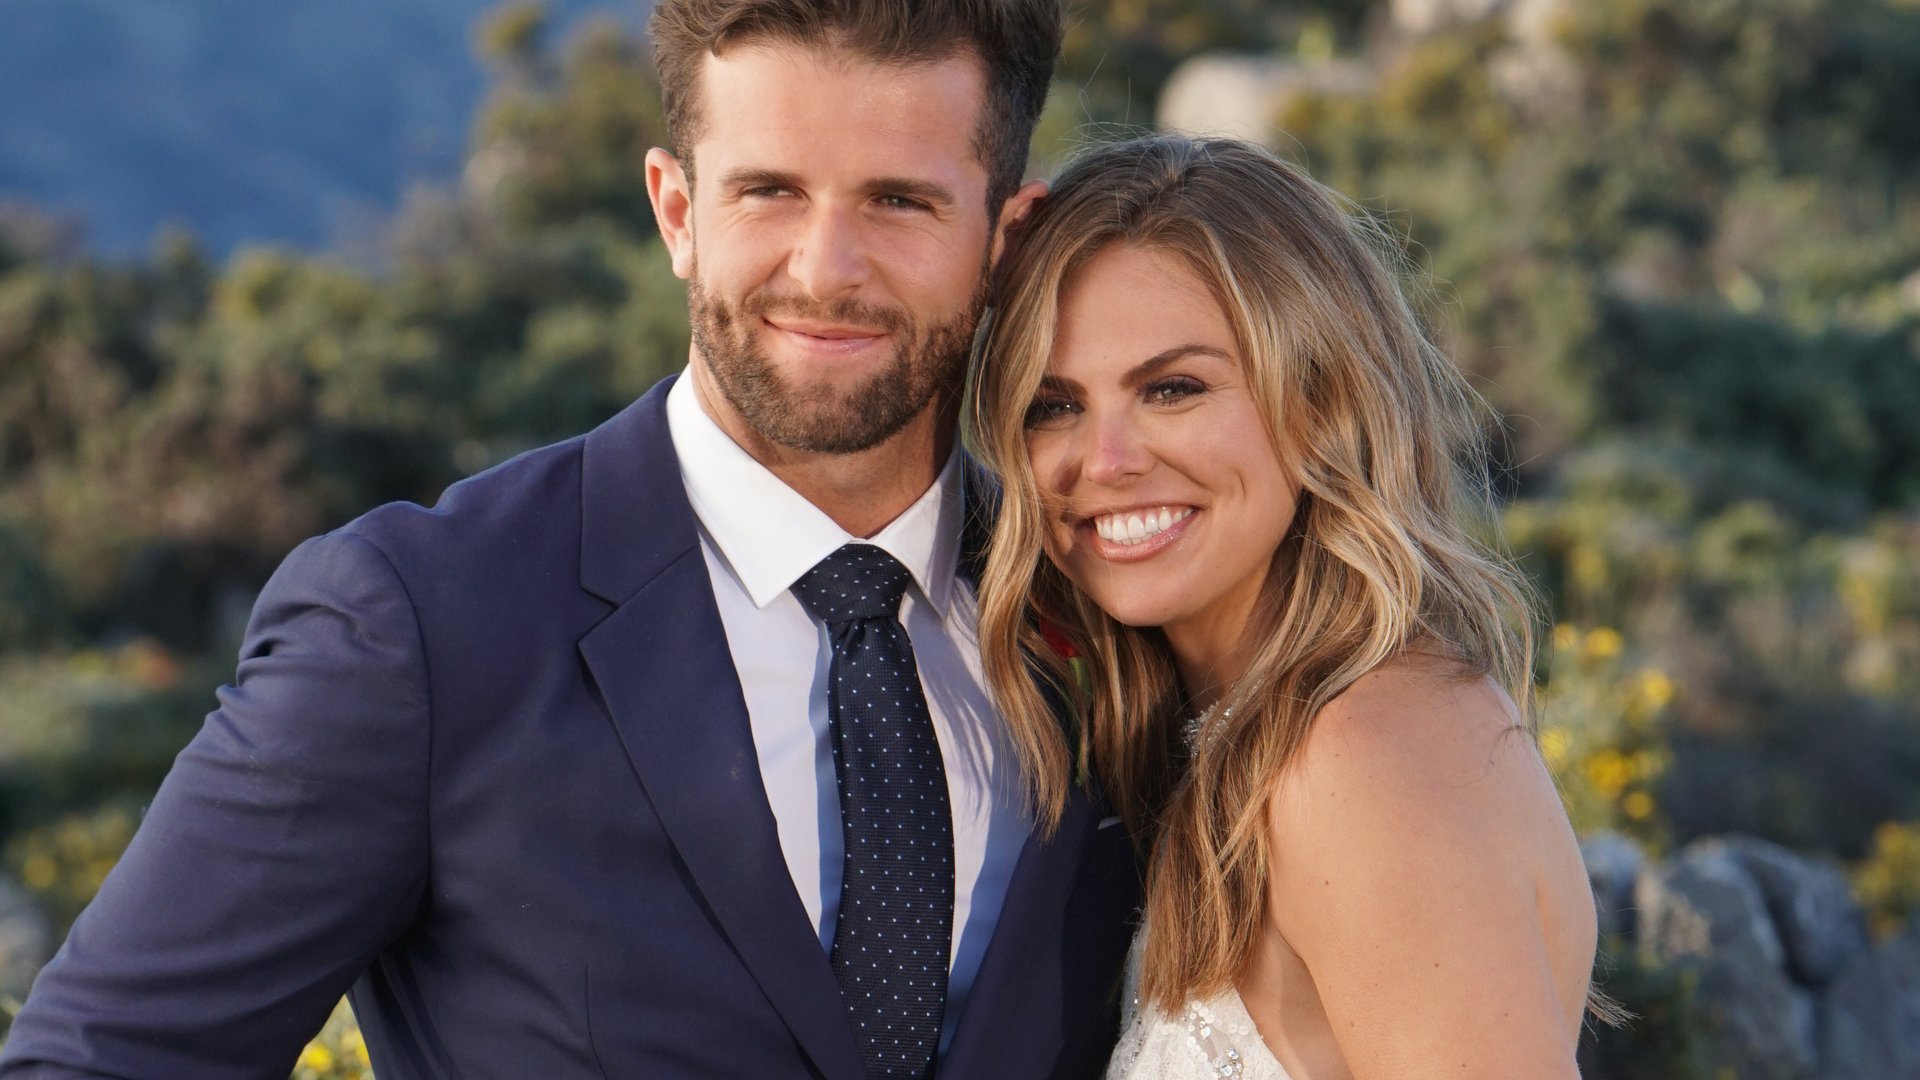 Jed Wyatt and Hannah Brown get engaged on 'The Bachelorette' Season 15 in 2019